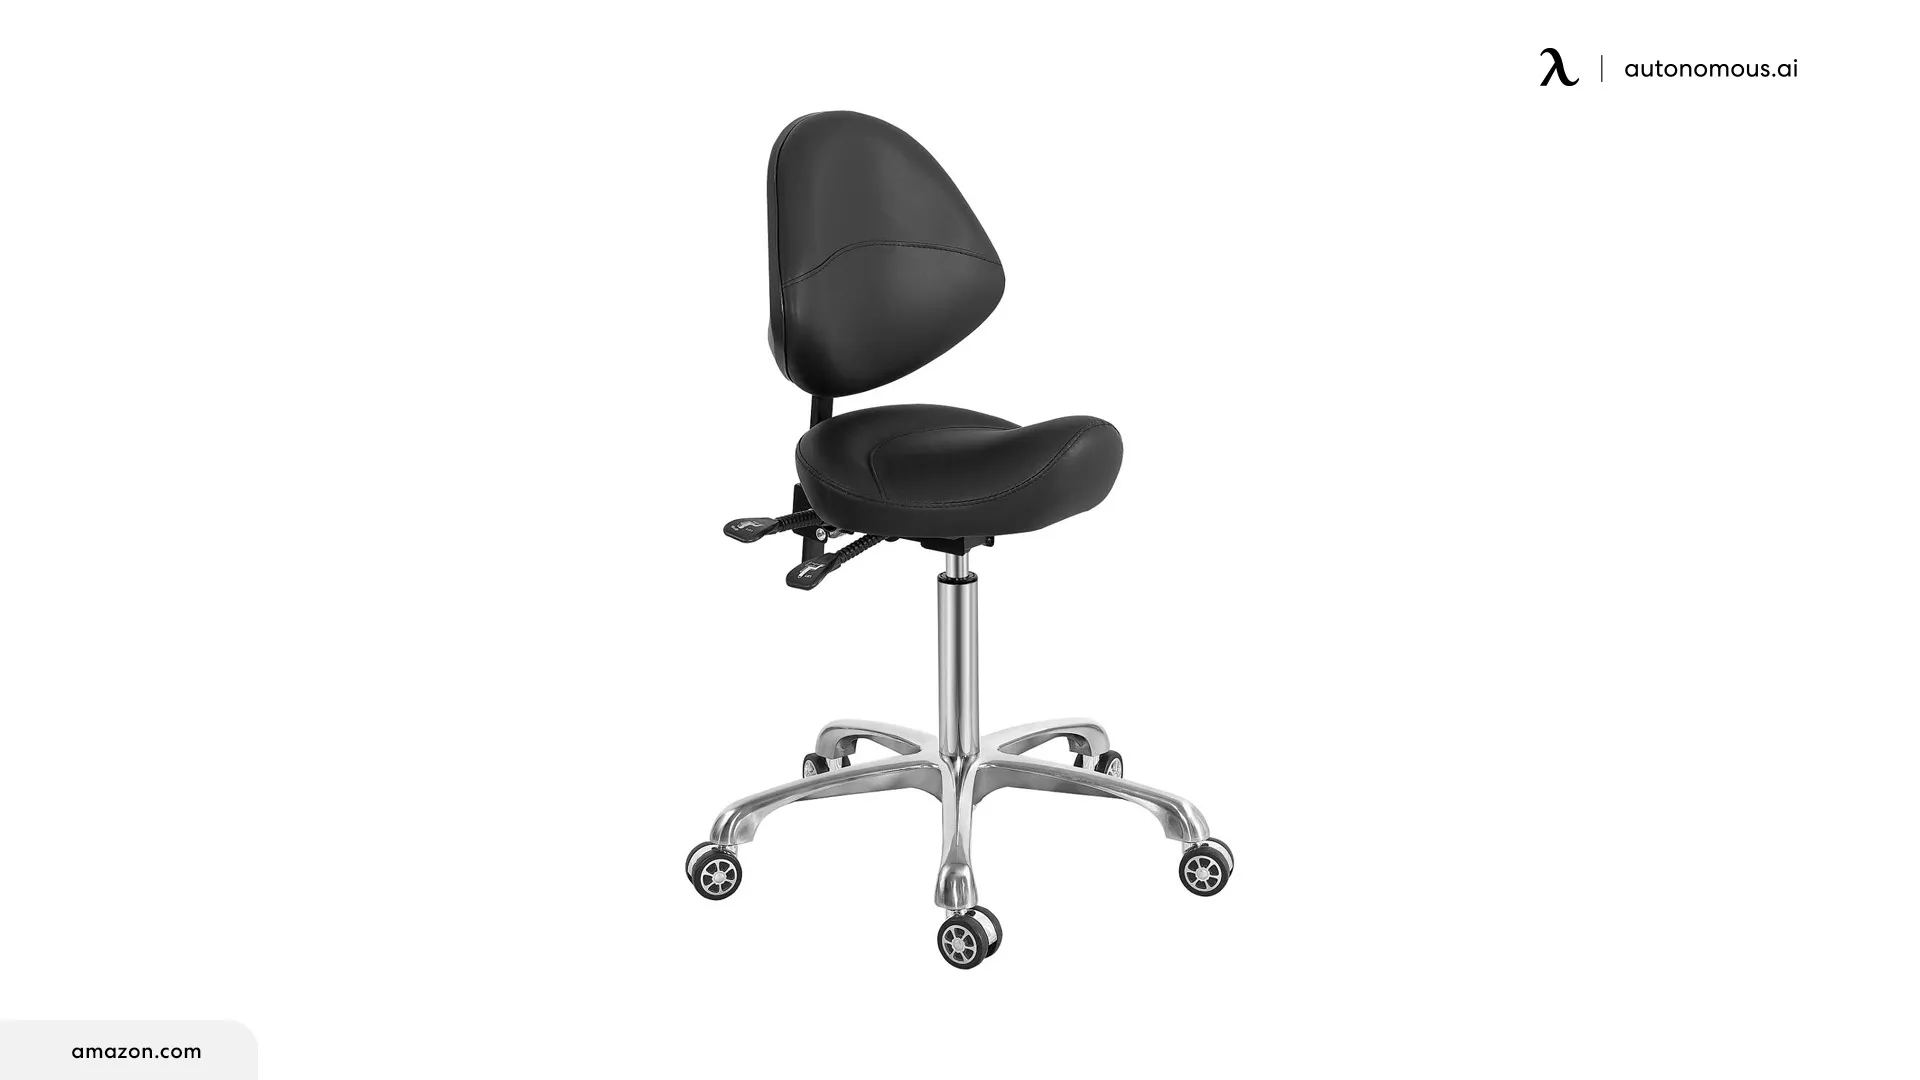 Nazalus Saddle Stool Chair with Back Support